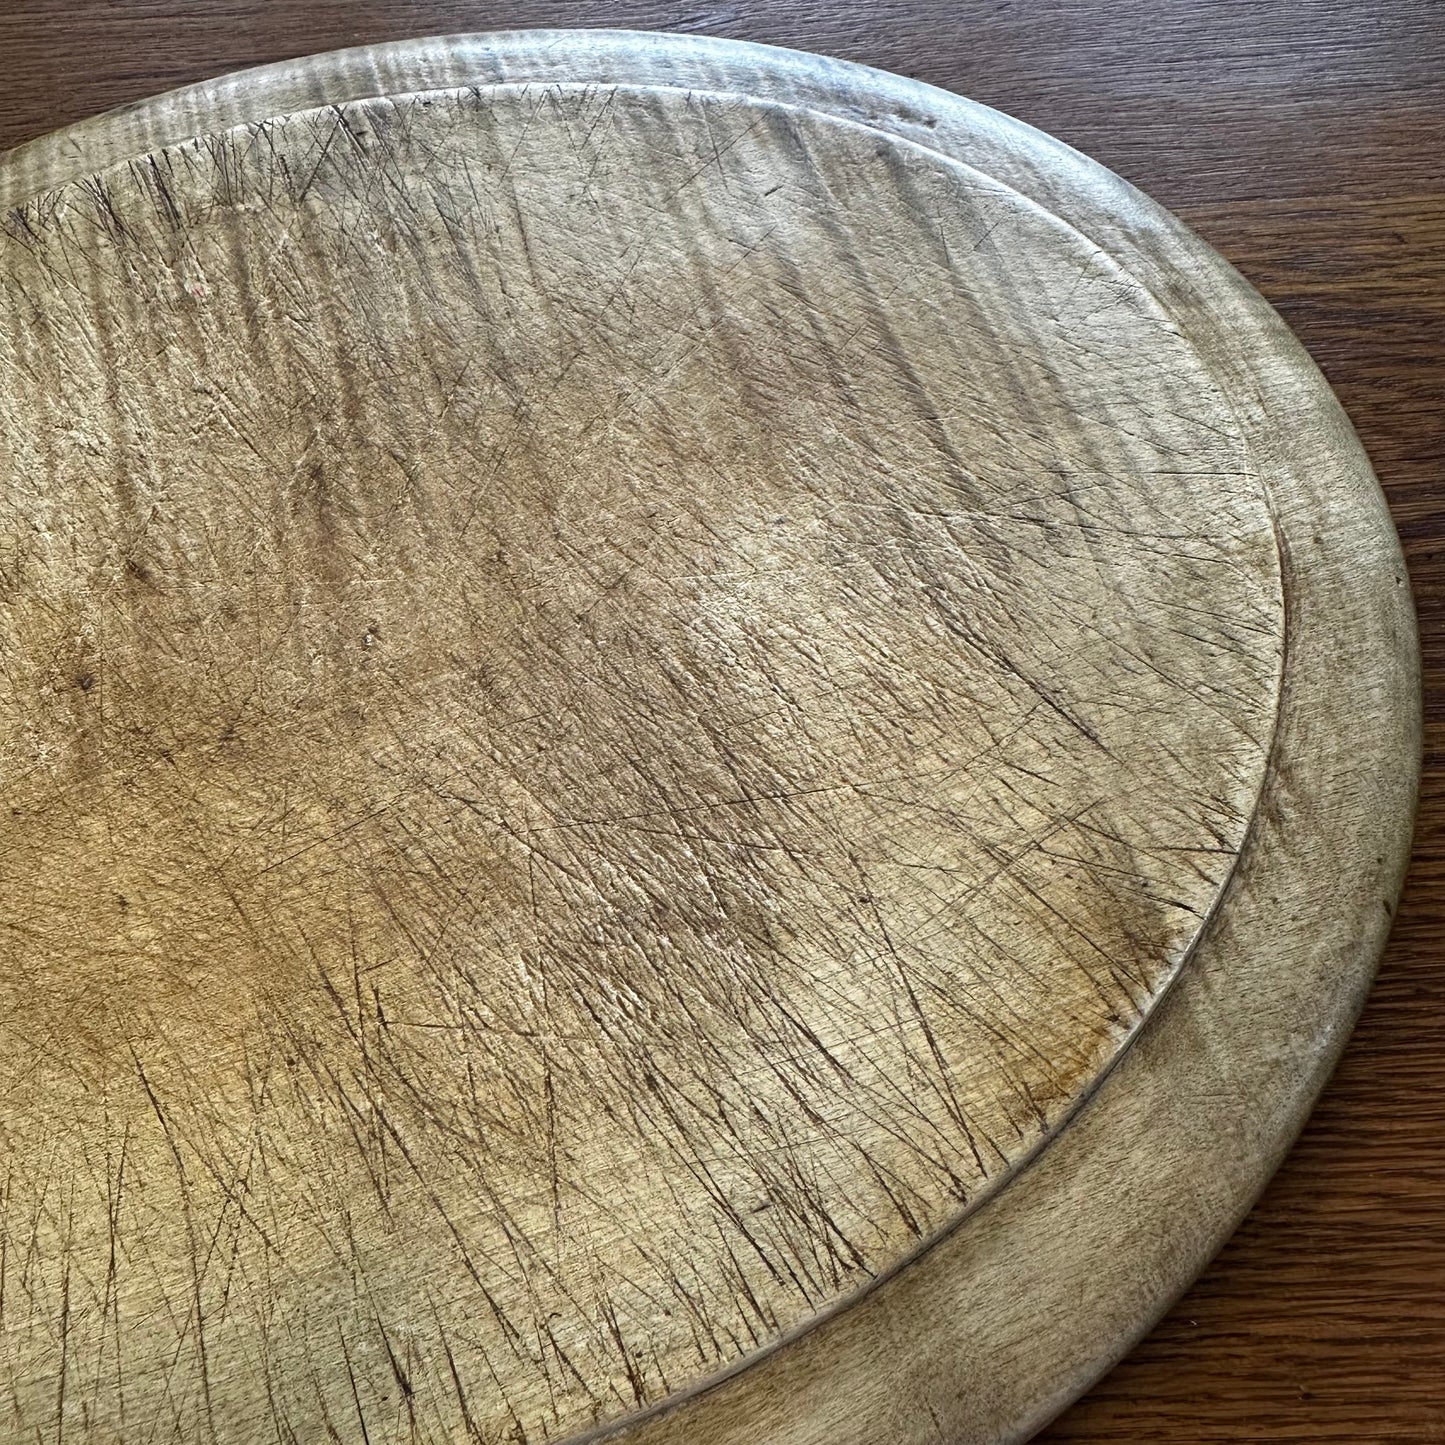 English Oval Carved Wooden Bread Board